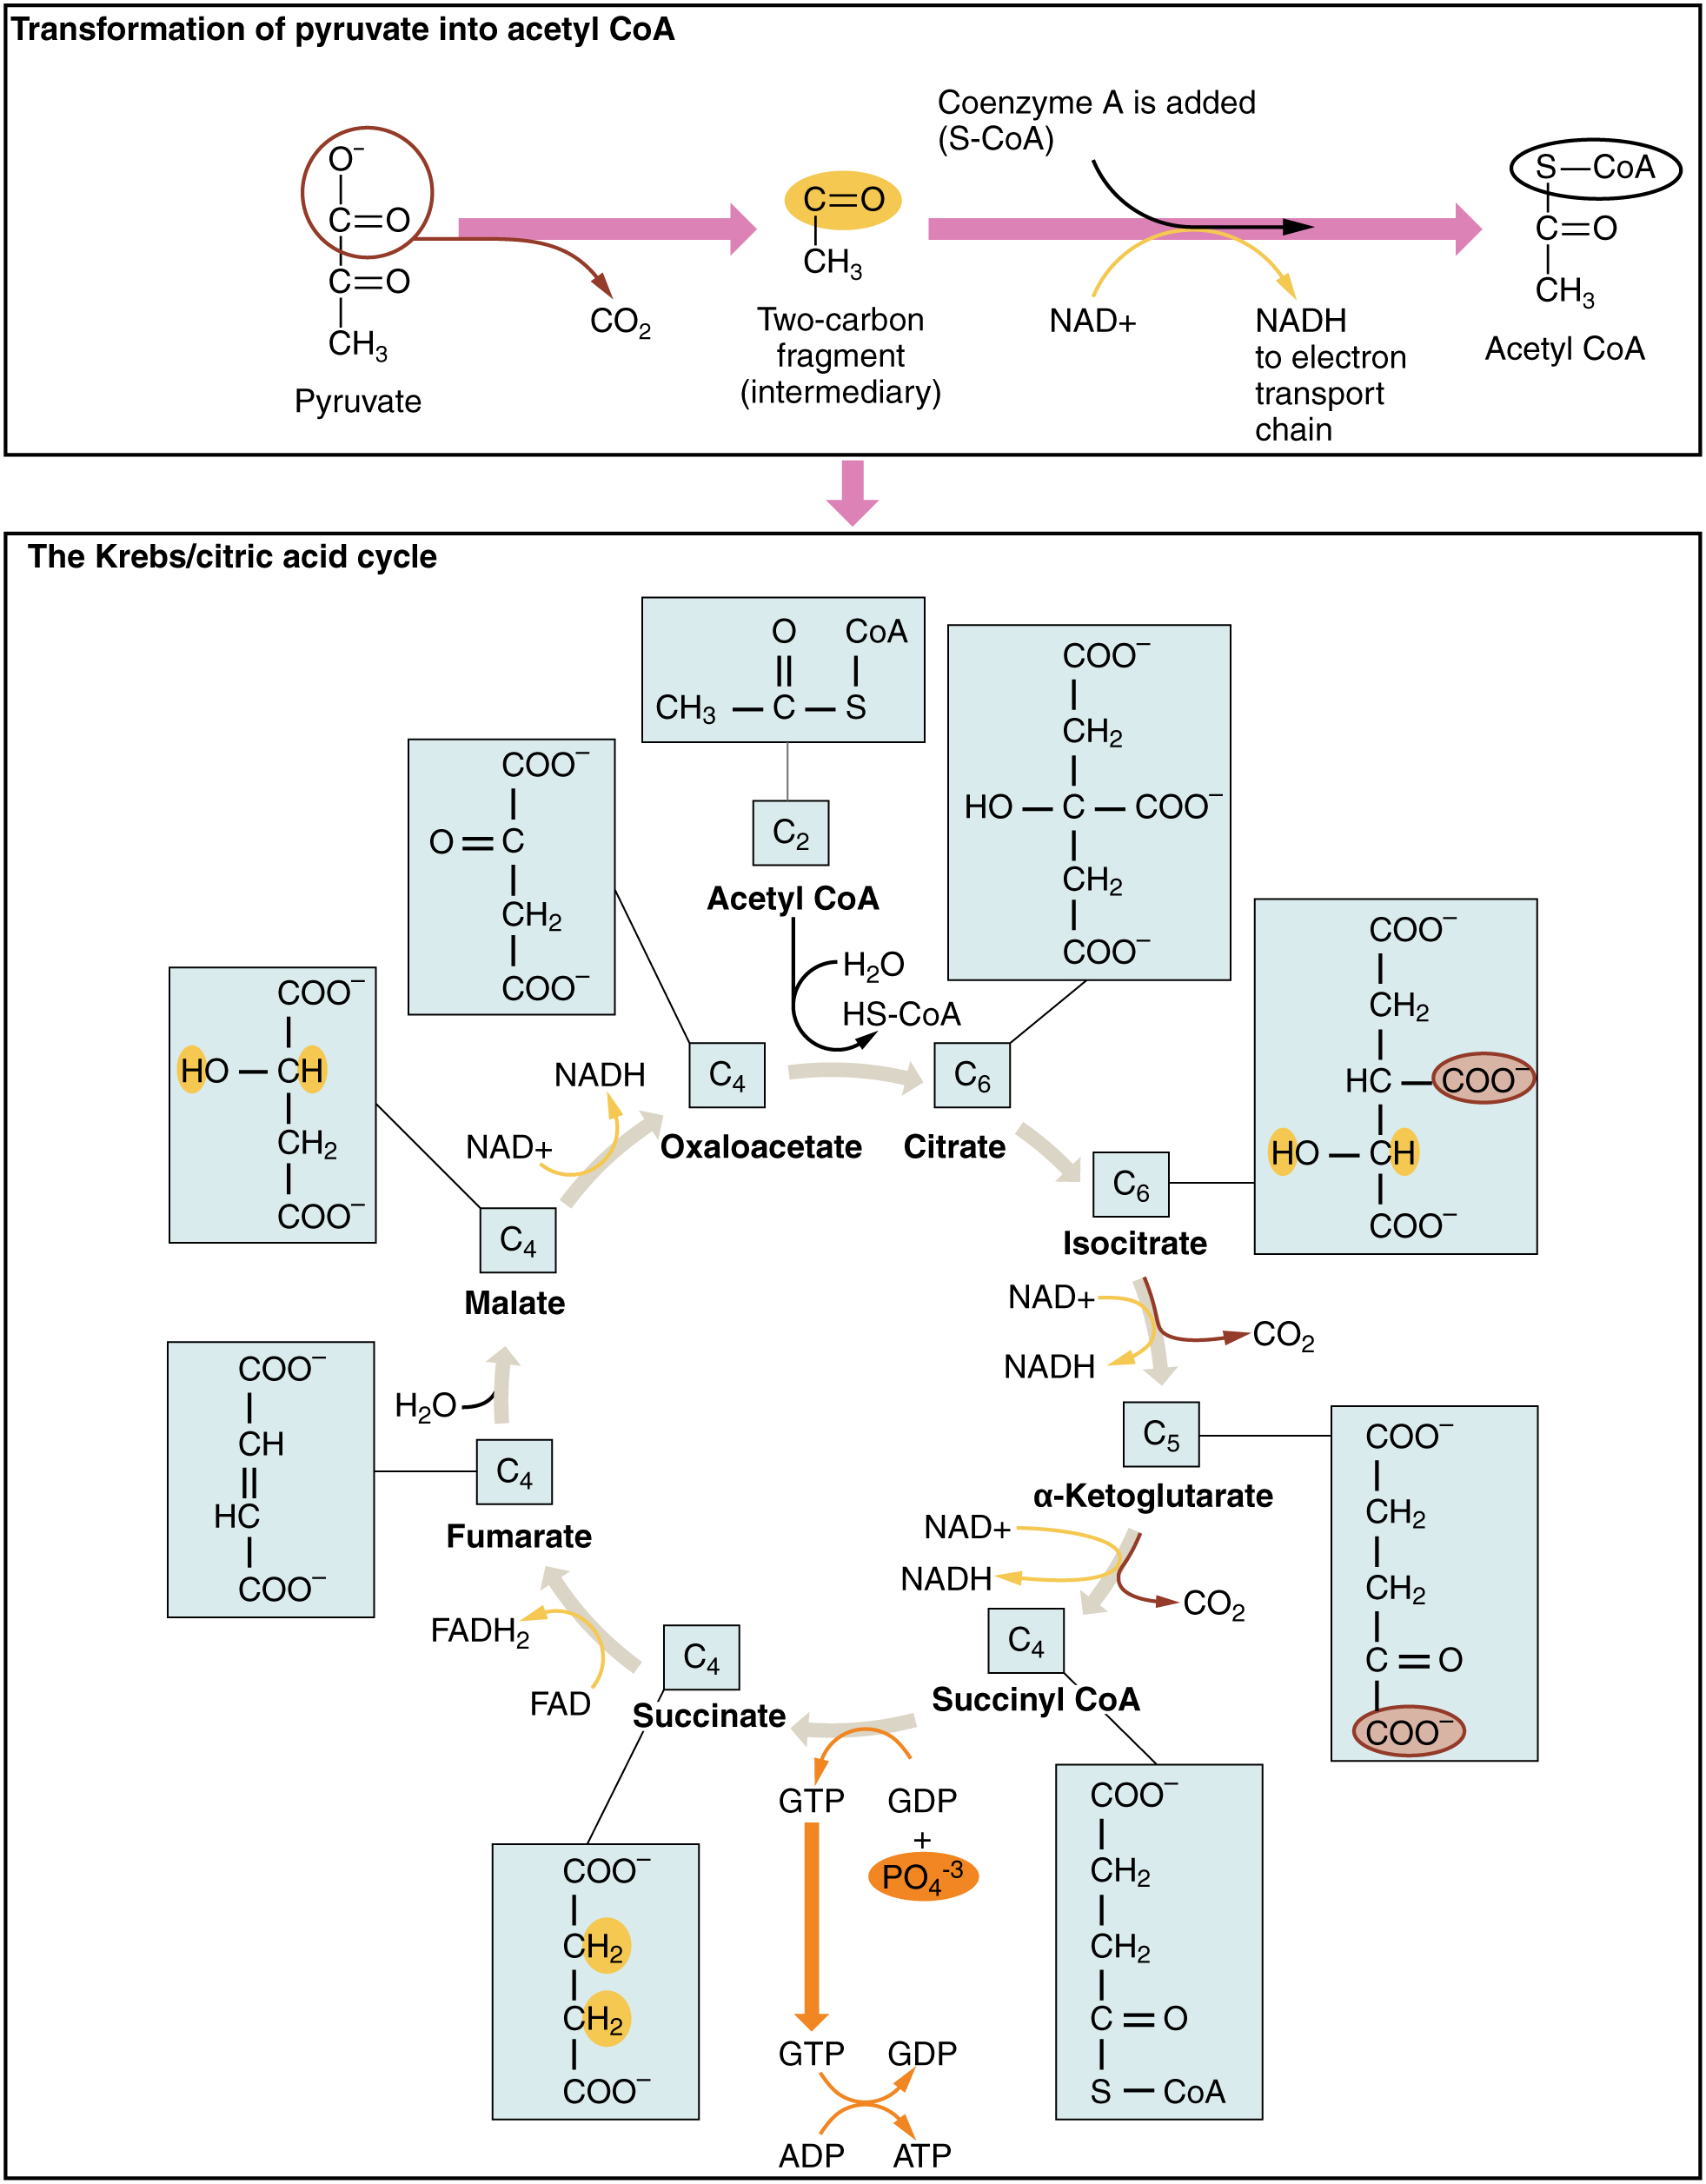 Image showing the chemical reactions of the Krebs cycle